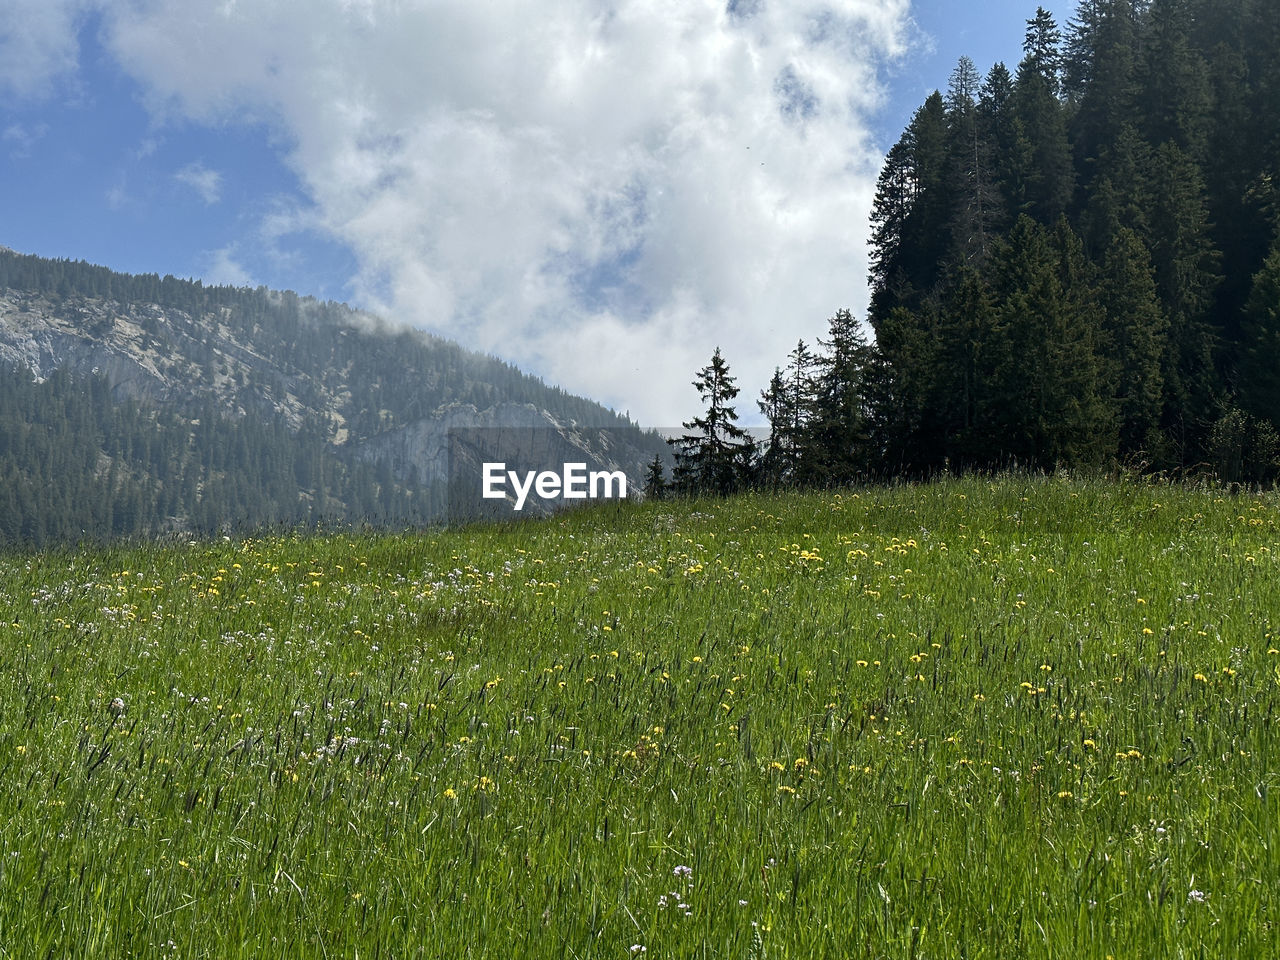 plant, meadow, nature, grass, sky, environment, grassland, mountain, land, tree, beauty in nature, mountain range, landscape, scenics - nature, natural environment, green, cloud, pasture, wilderness, flower, field, plateau, no people, forest, prairie, pine tree, coniferous tree, non-urban scene, ridge, tranquility, pinaceae, growth, pine woodland, tranquil scene, rural area, plain, outdoors, day, travel, travel destinations, sunlight, summer, springtime, social issues, rural scene, wildflower, freshness, idyllic